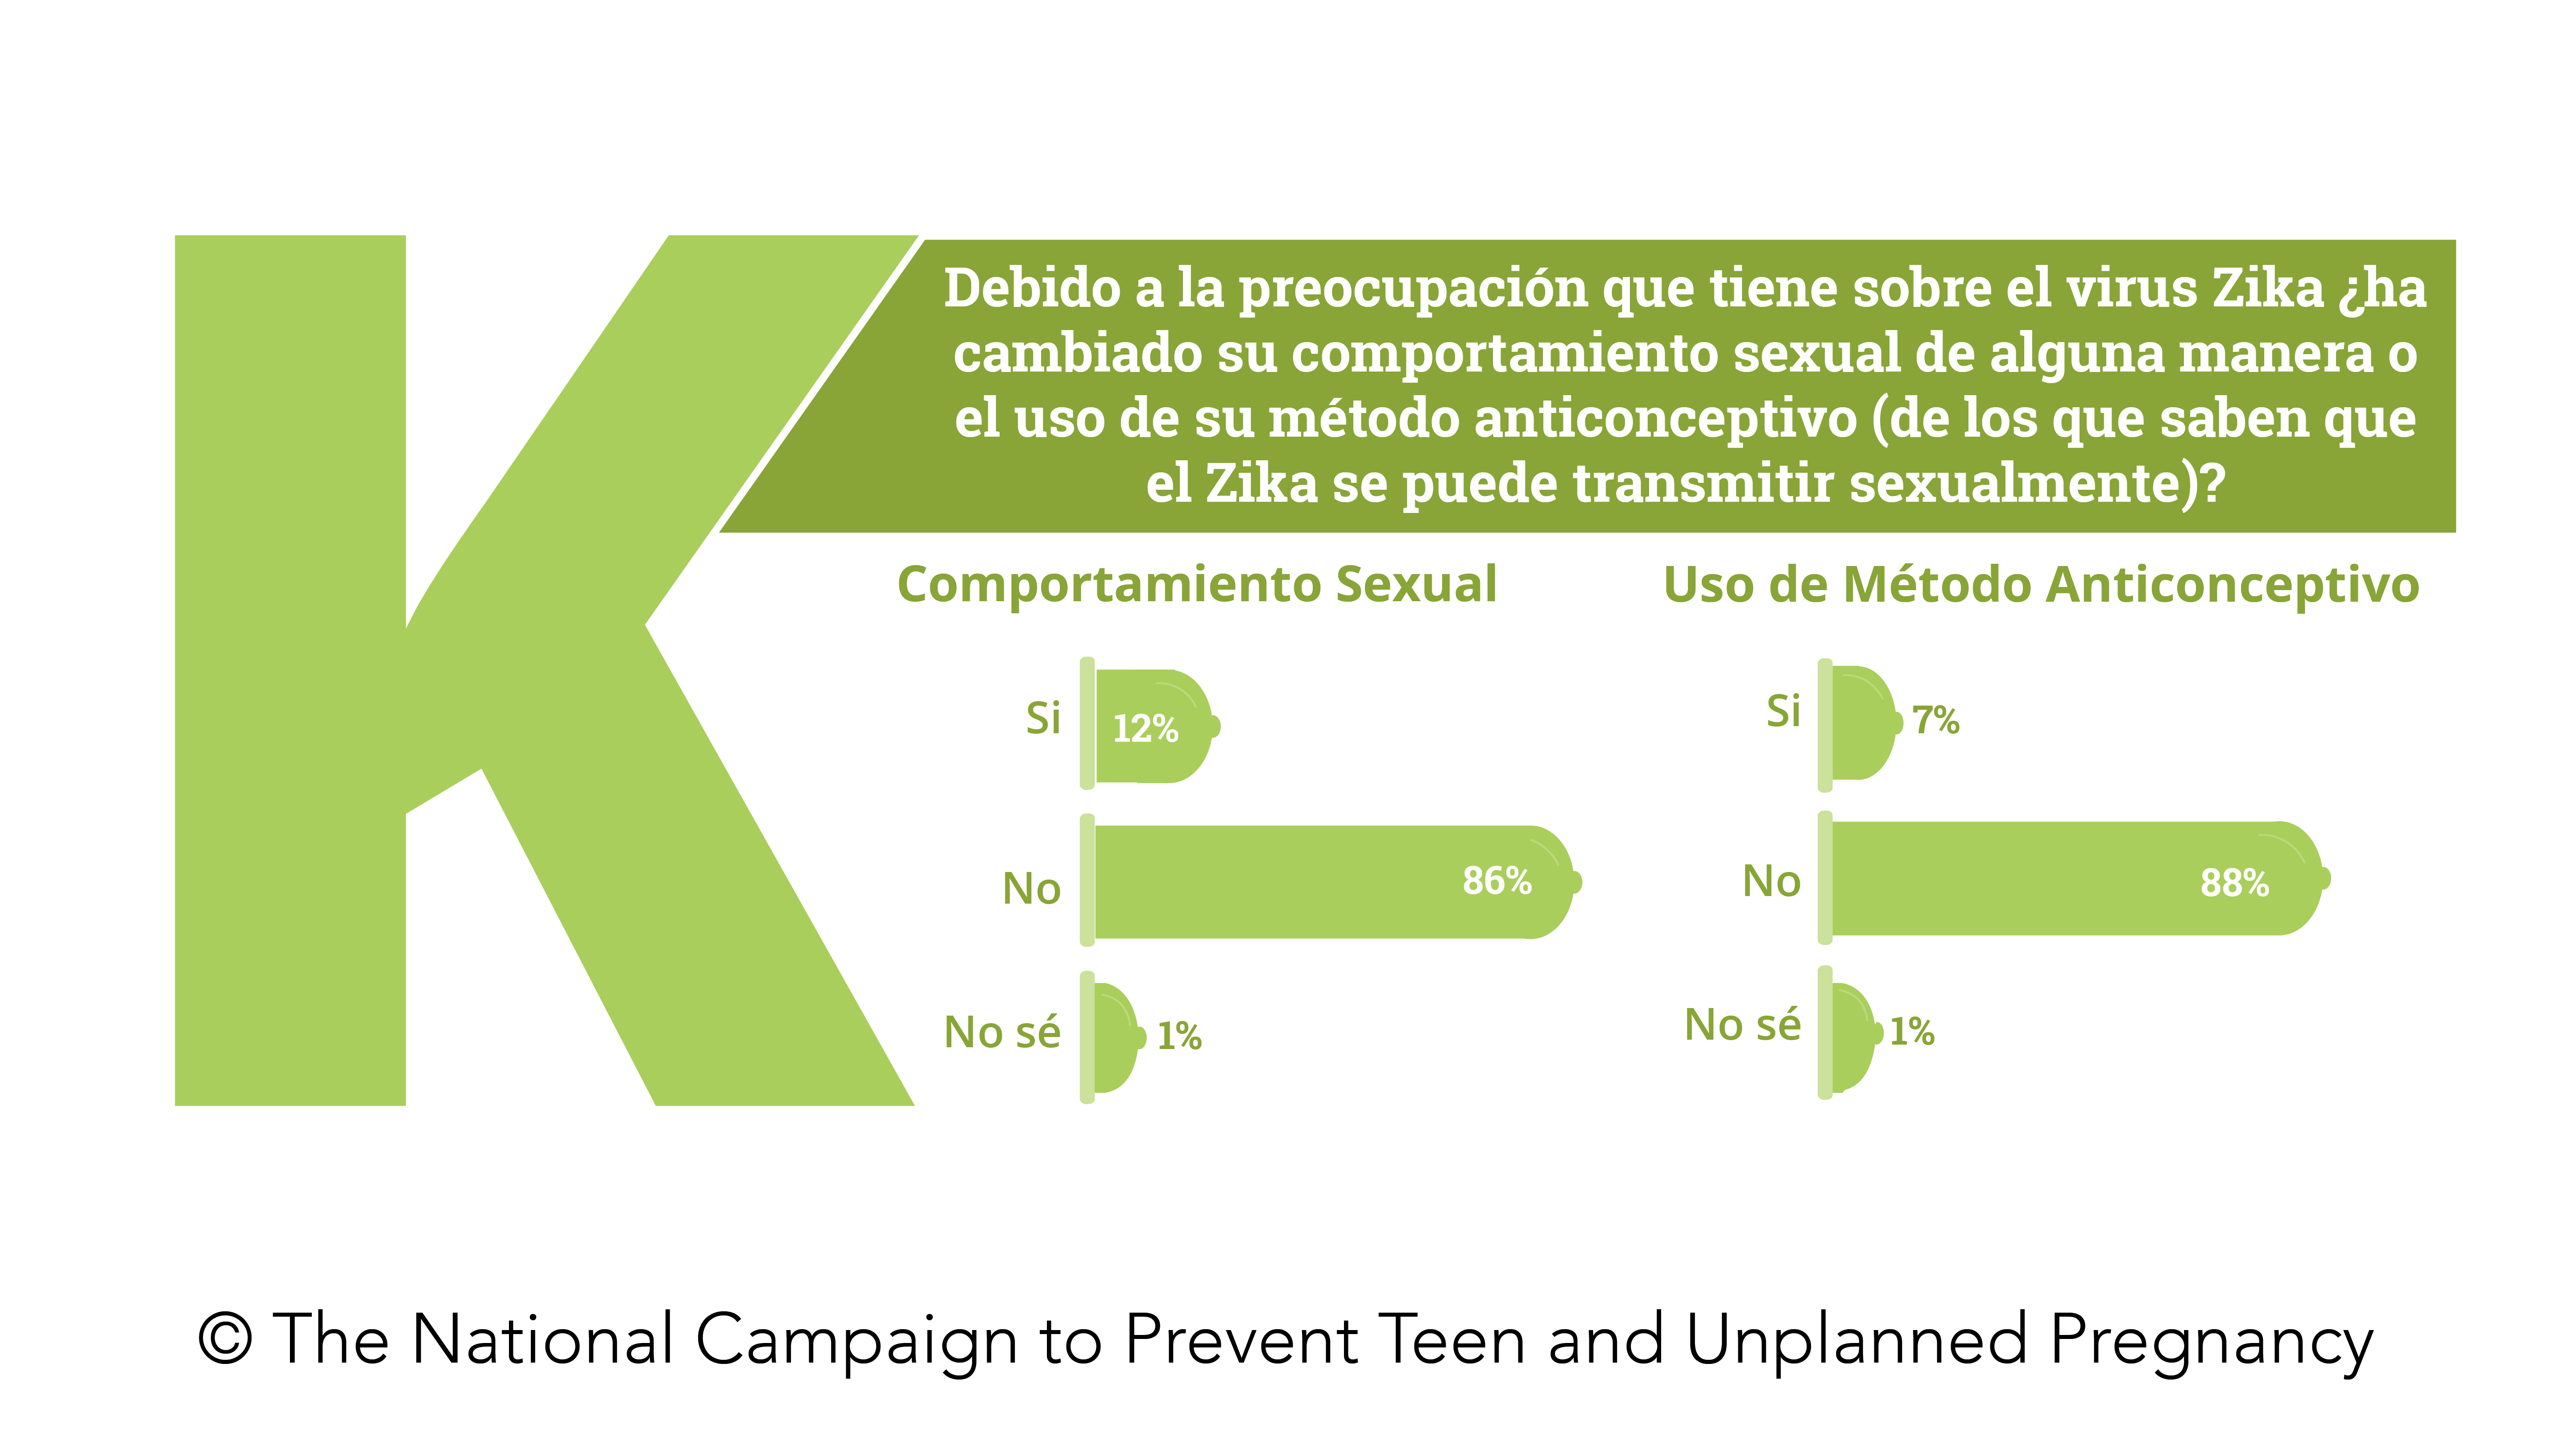 Survey Says: Unplanned Pregnancy and the Zika Virus (June 2016)